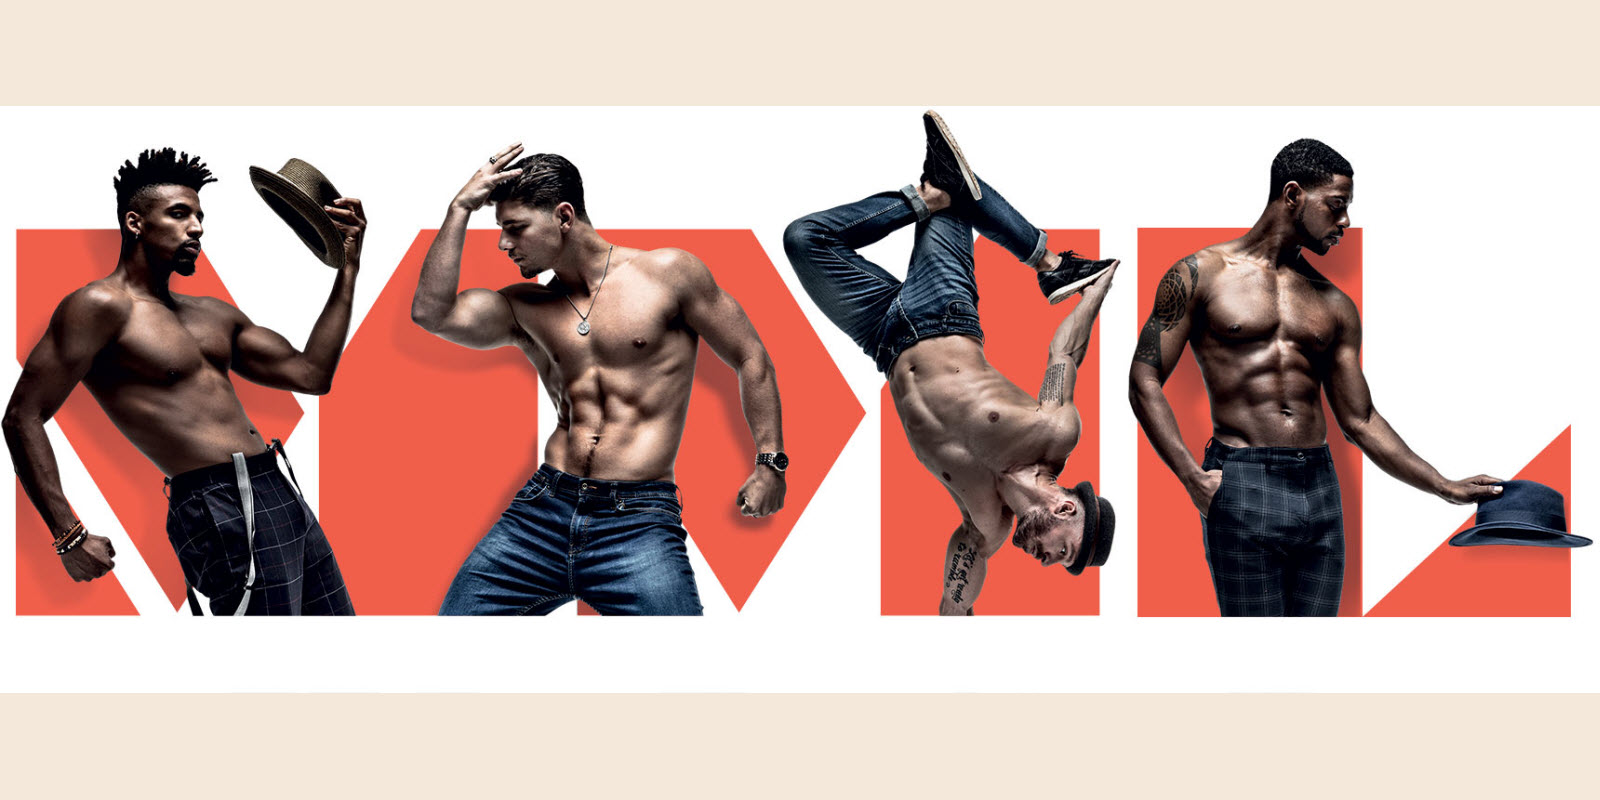 Shirtless Magic Mike Live performers in different poses